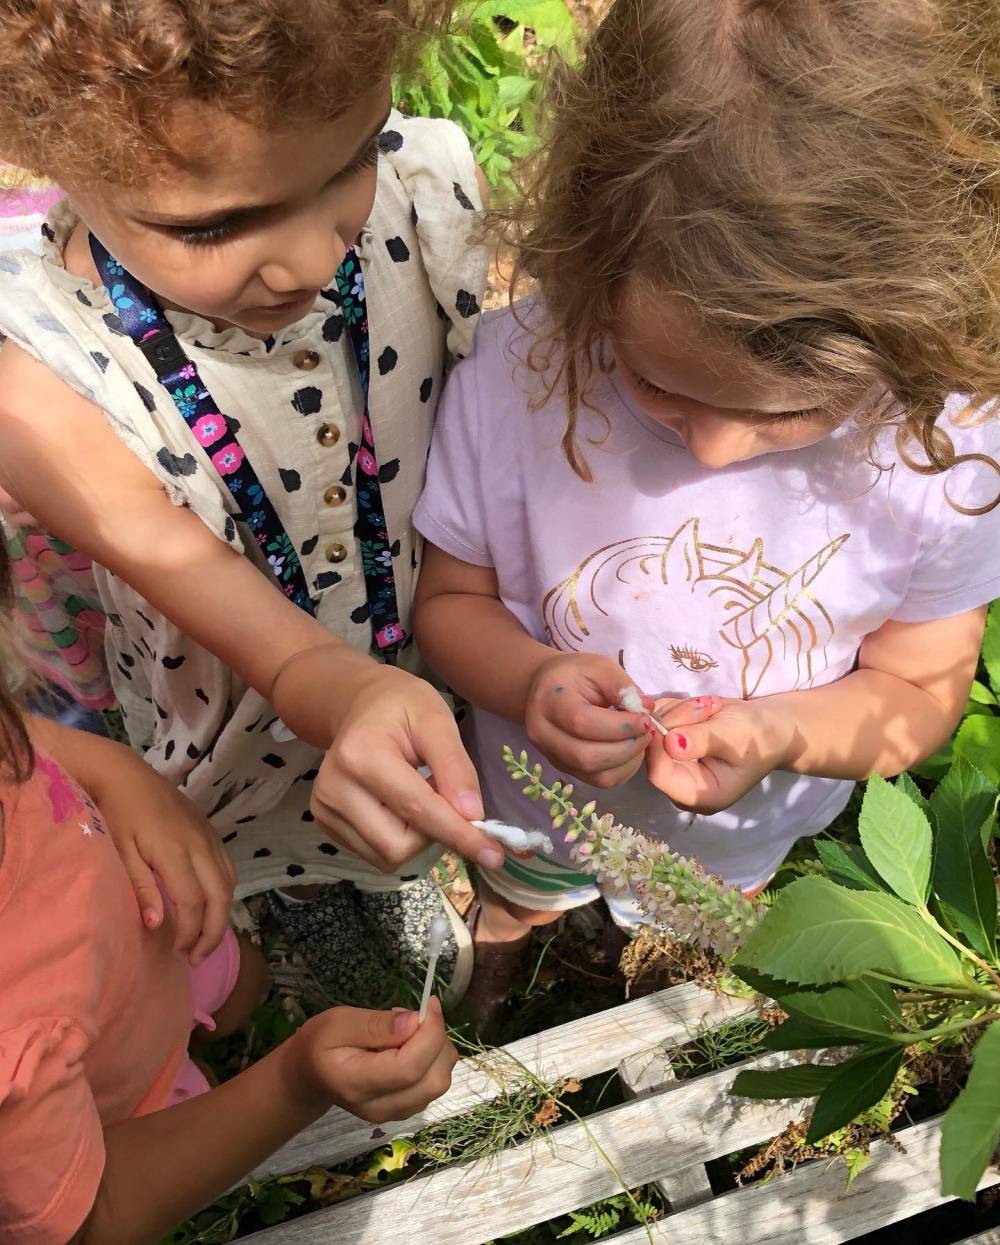 TOP NEW JERSEY ACADEMIC CAMP: Cora Hartshorn Nature Discovery  is a Top Academic Summer Camp located in Short Hills New Jersey offering many fun and enriching Academic and other camp programs. 